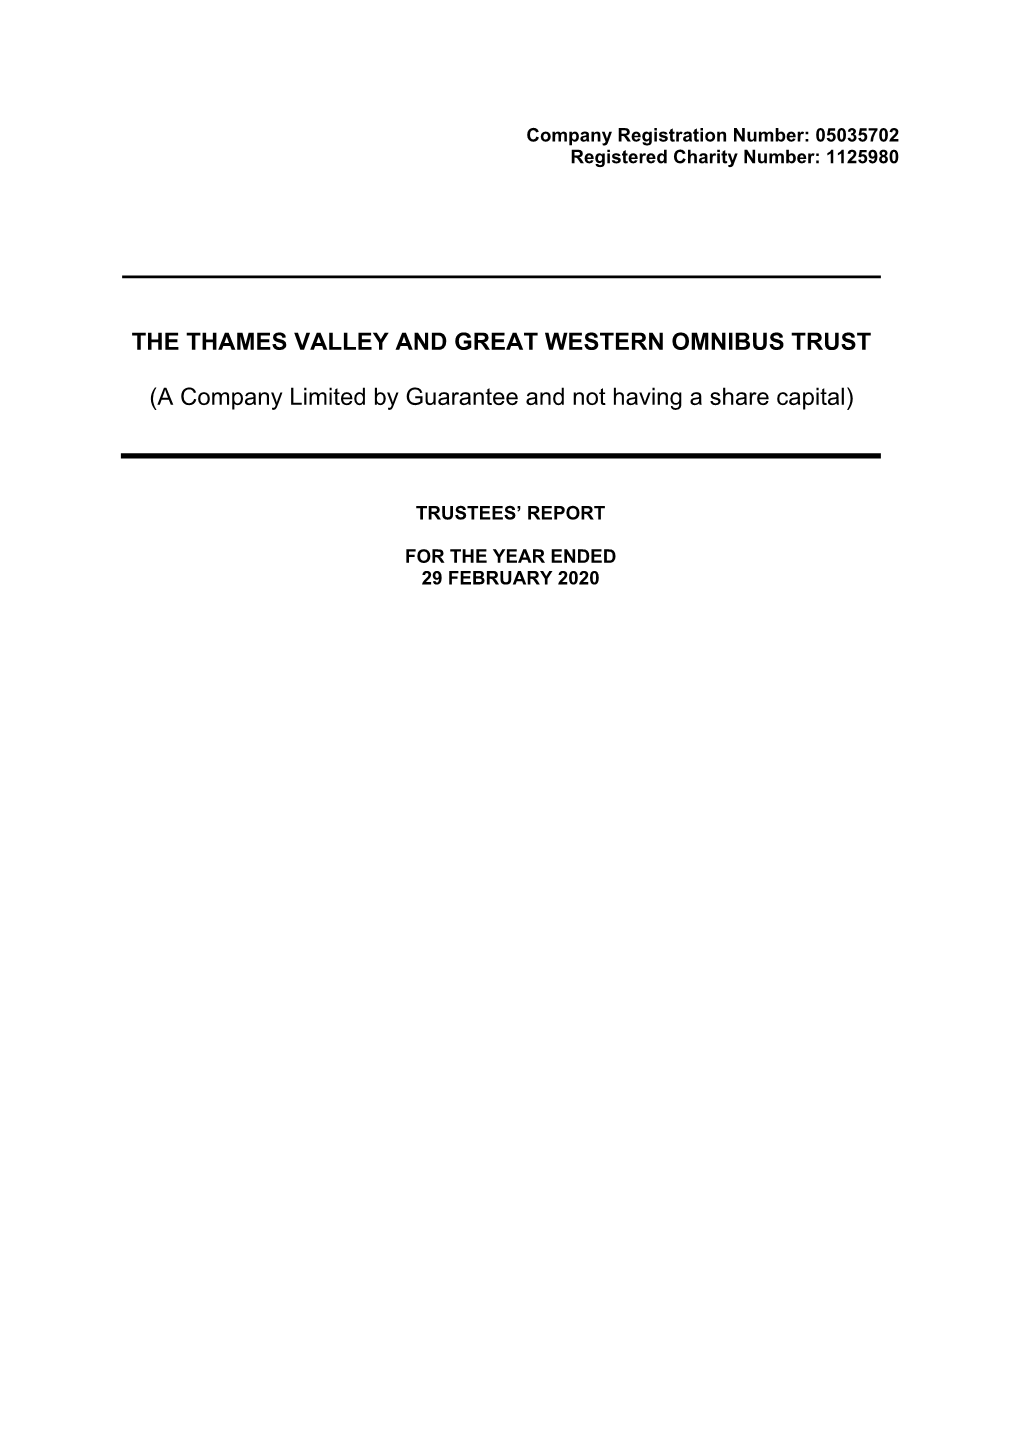 The Thames Valley and Great Western Omnibus Trust